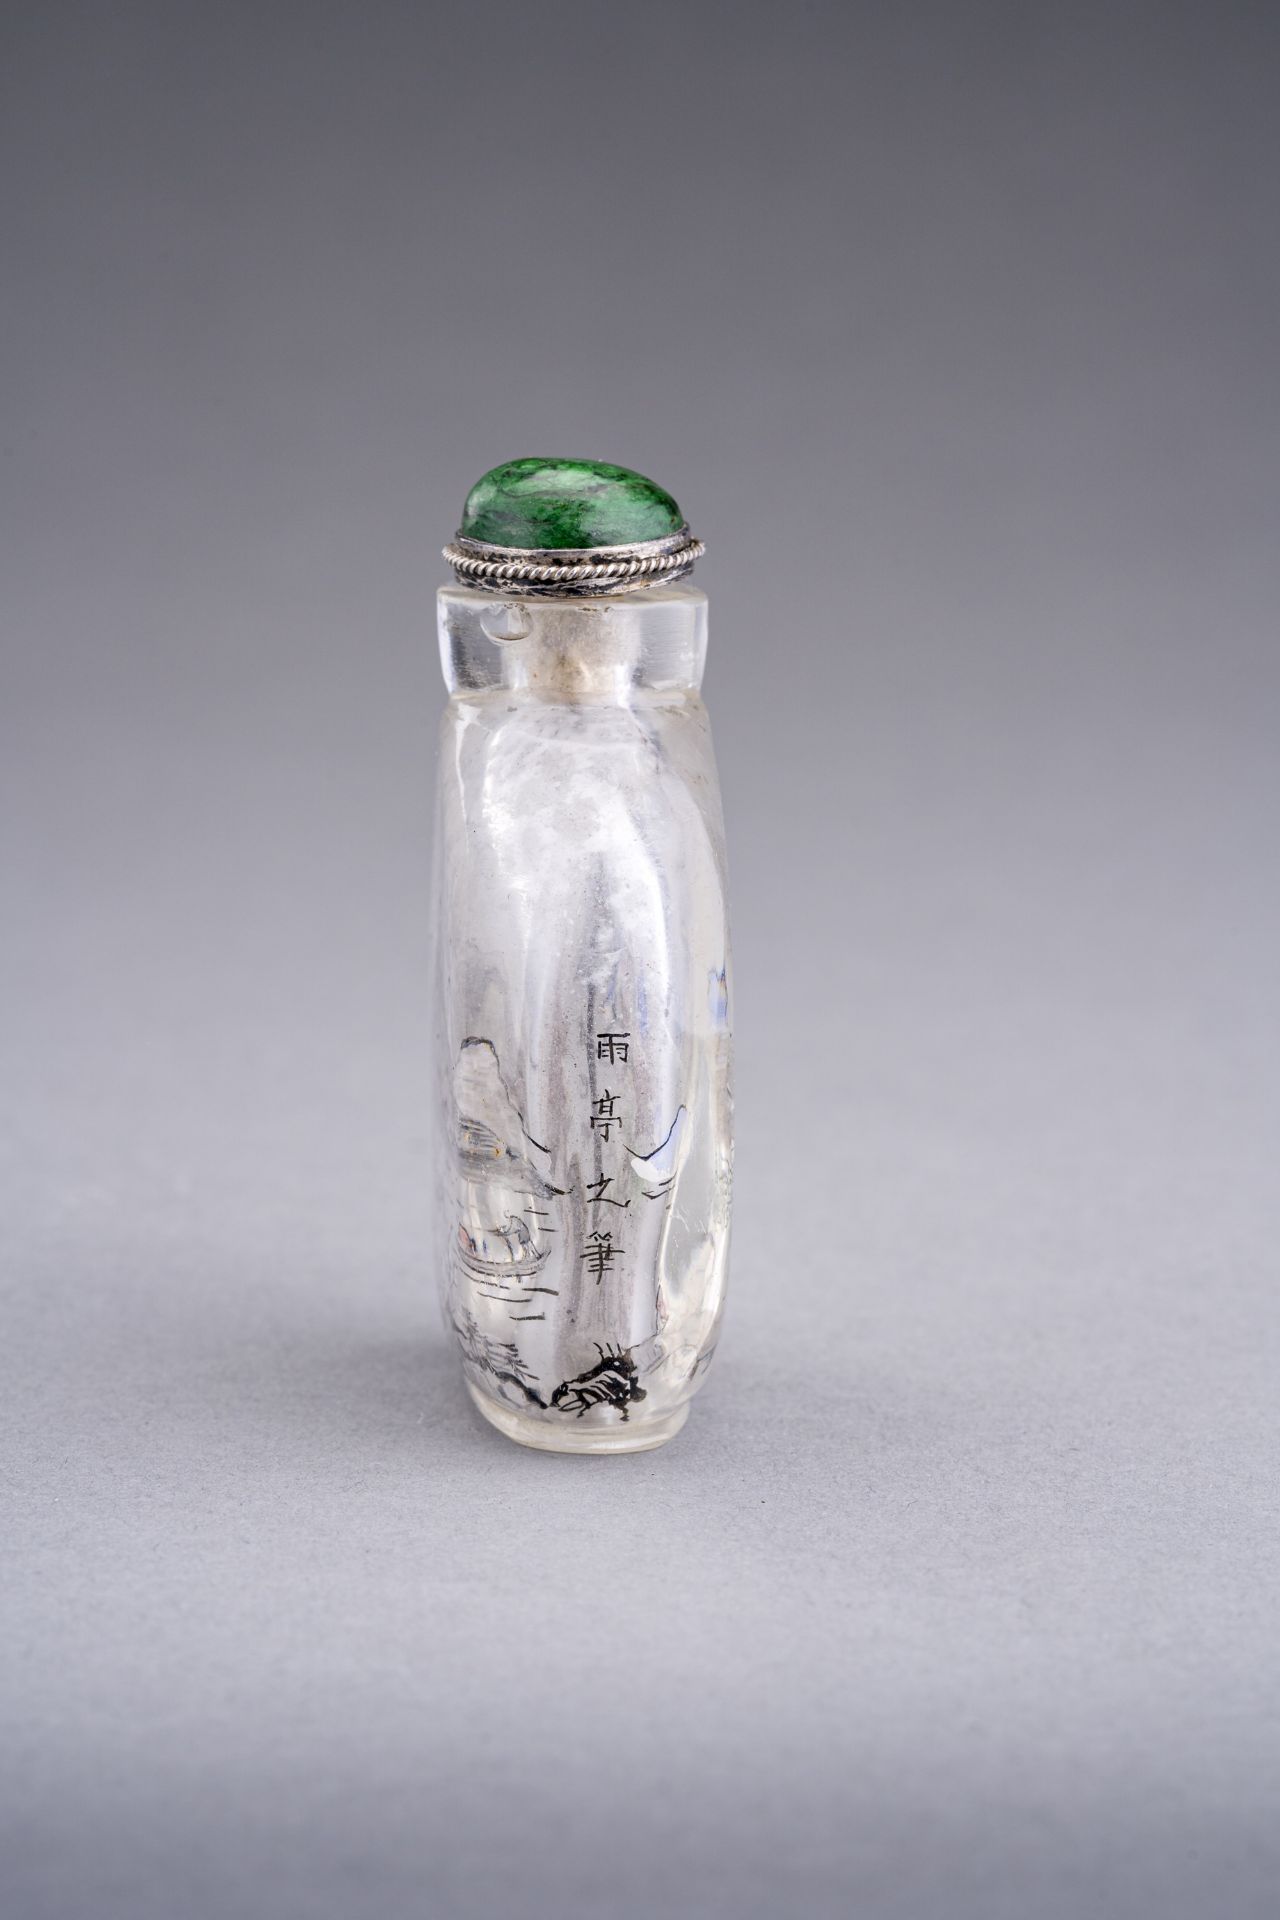 AN INSIDE-PAINTED '' GLASS SNUFF BOTTLE, AFTER YU TING, c. 1920s - Image 2 of 8